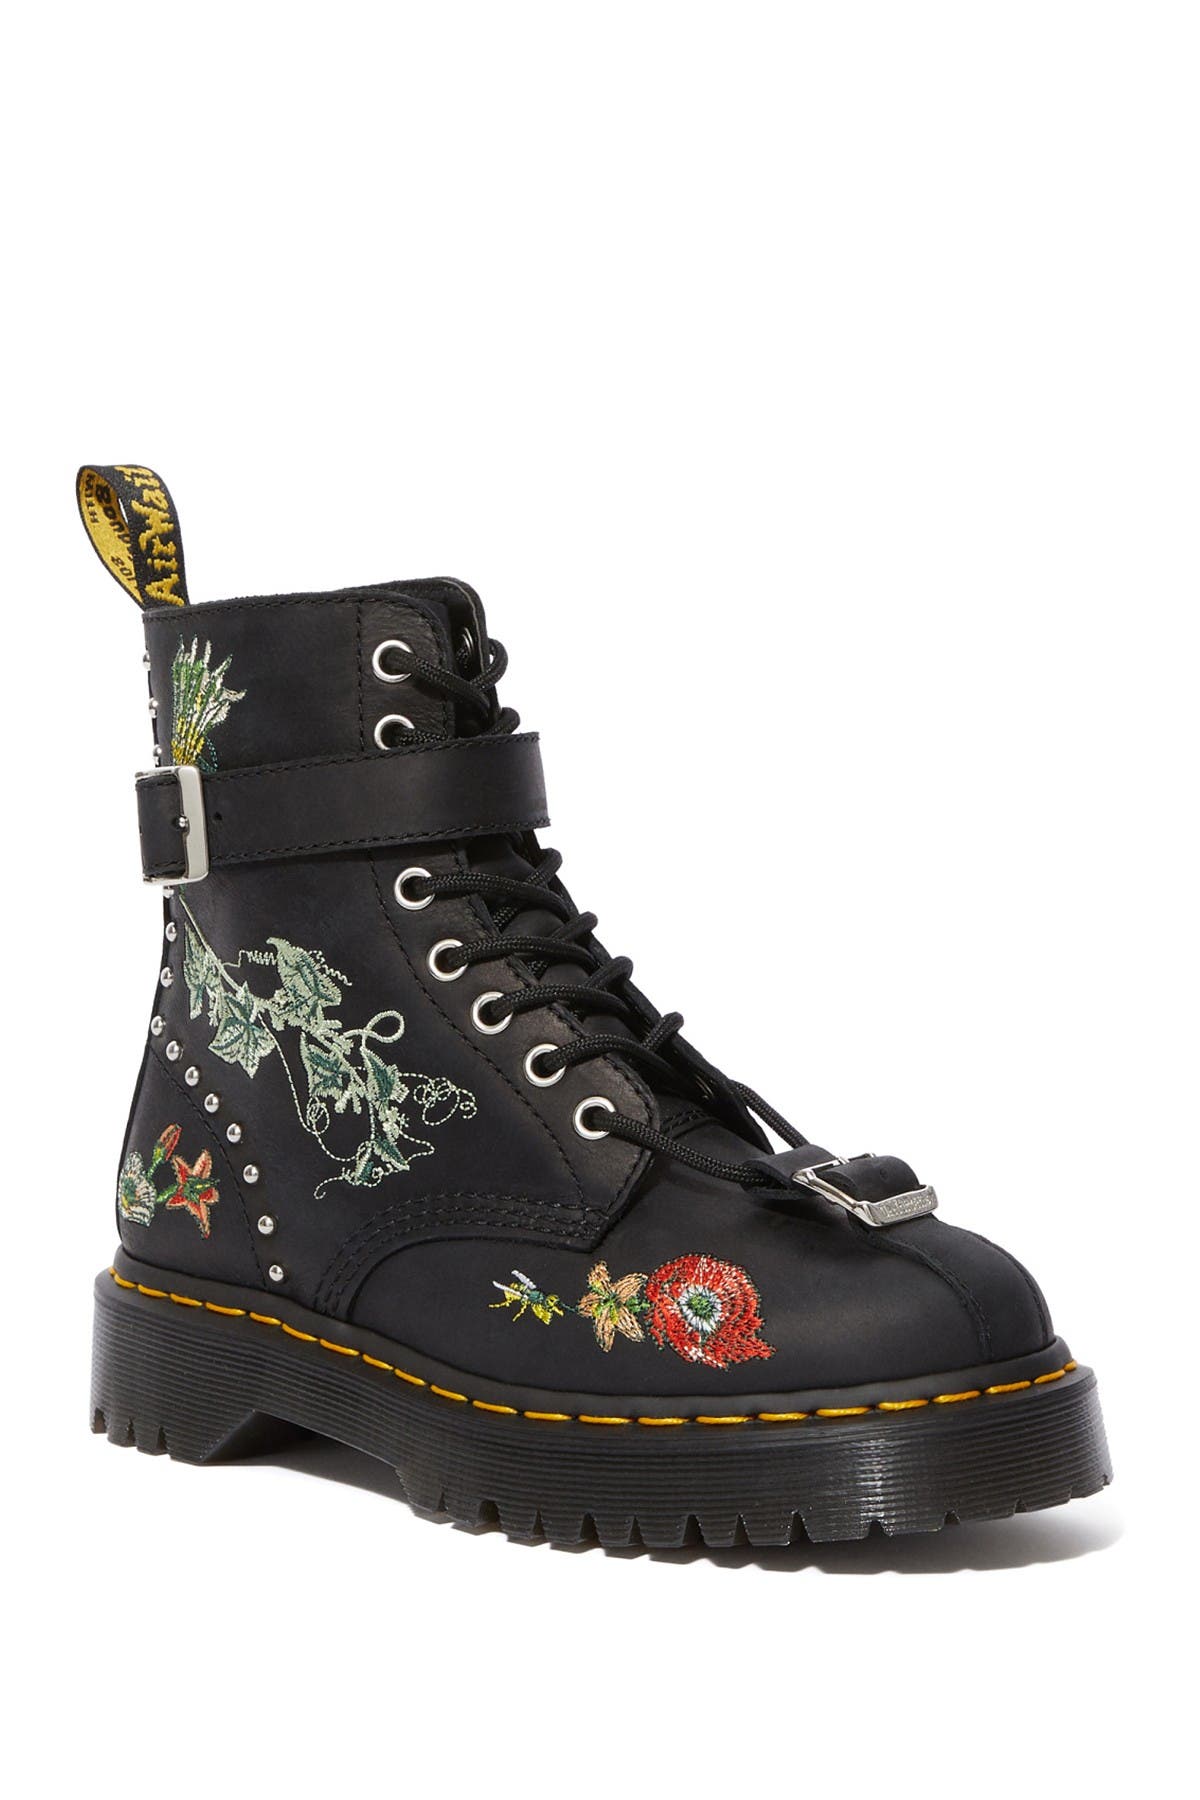 rose embroidered combat boots